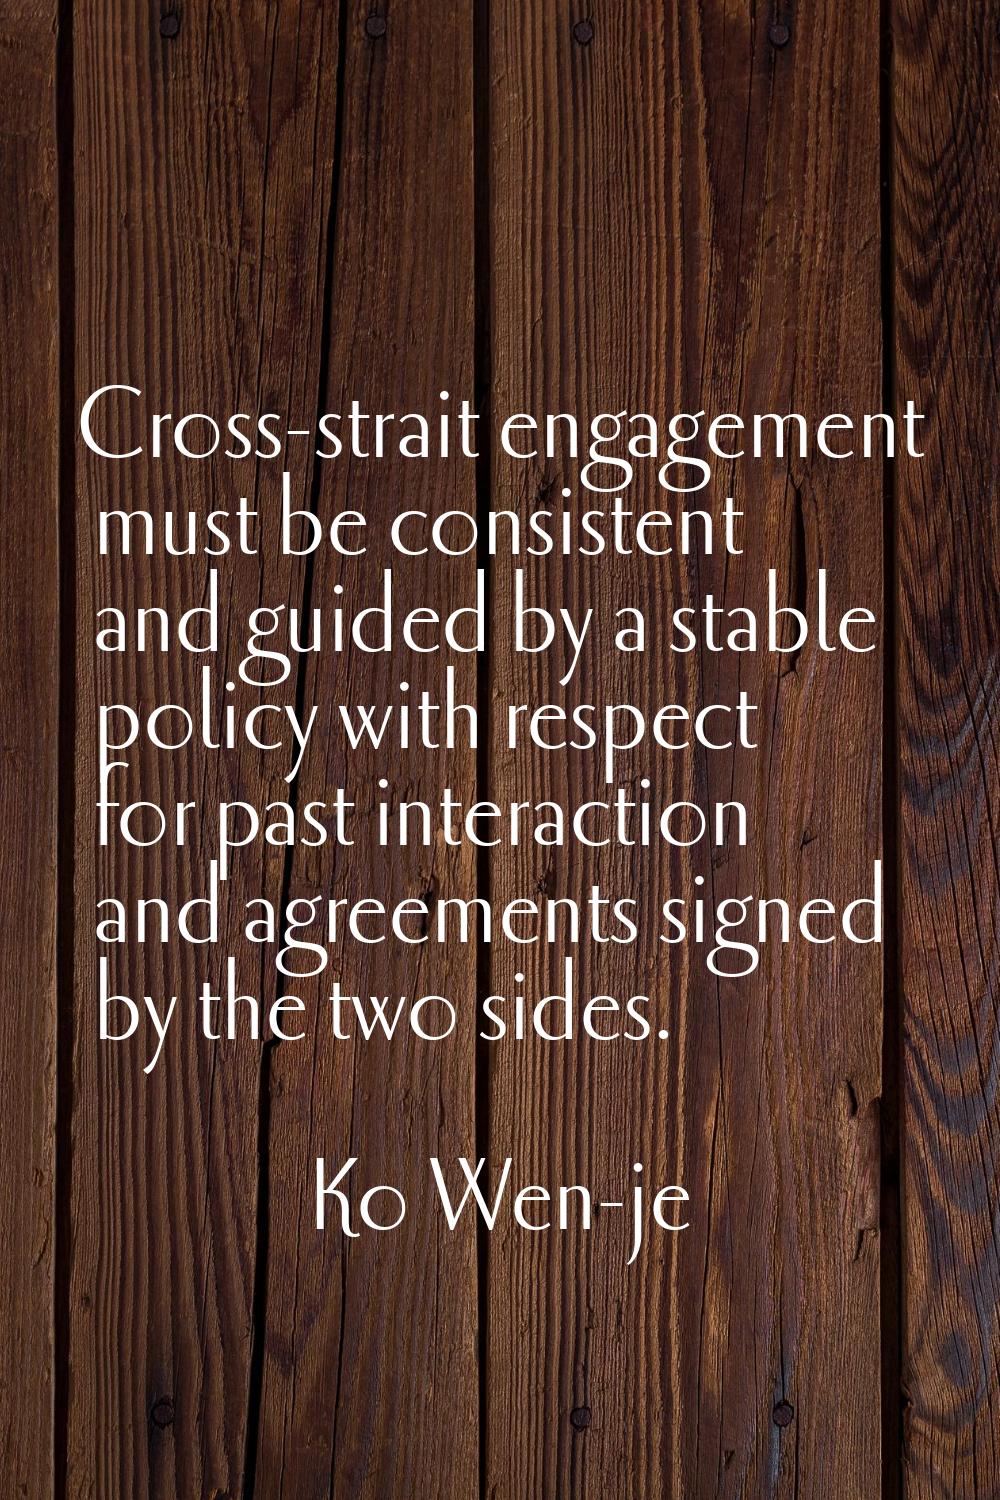 Cross-strait engagement must be consistent and guided by a stable policy with respect for past inte